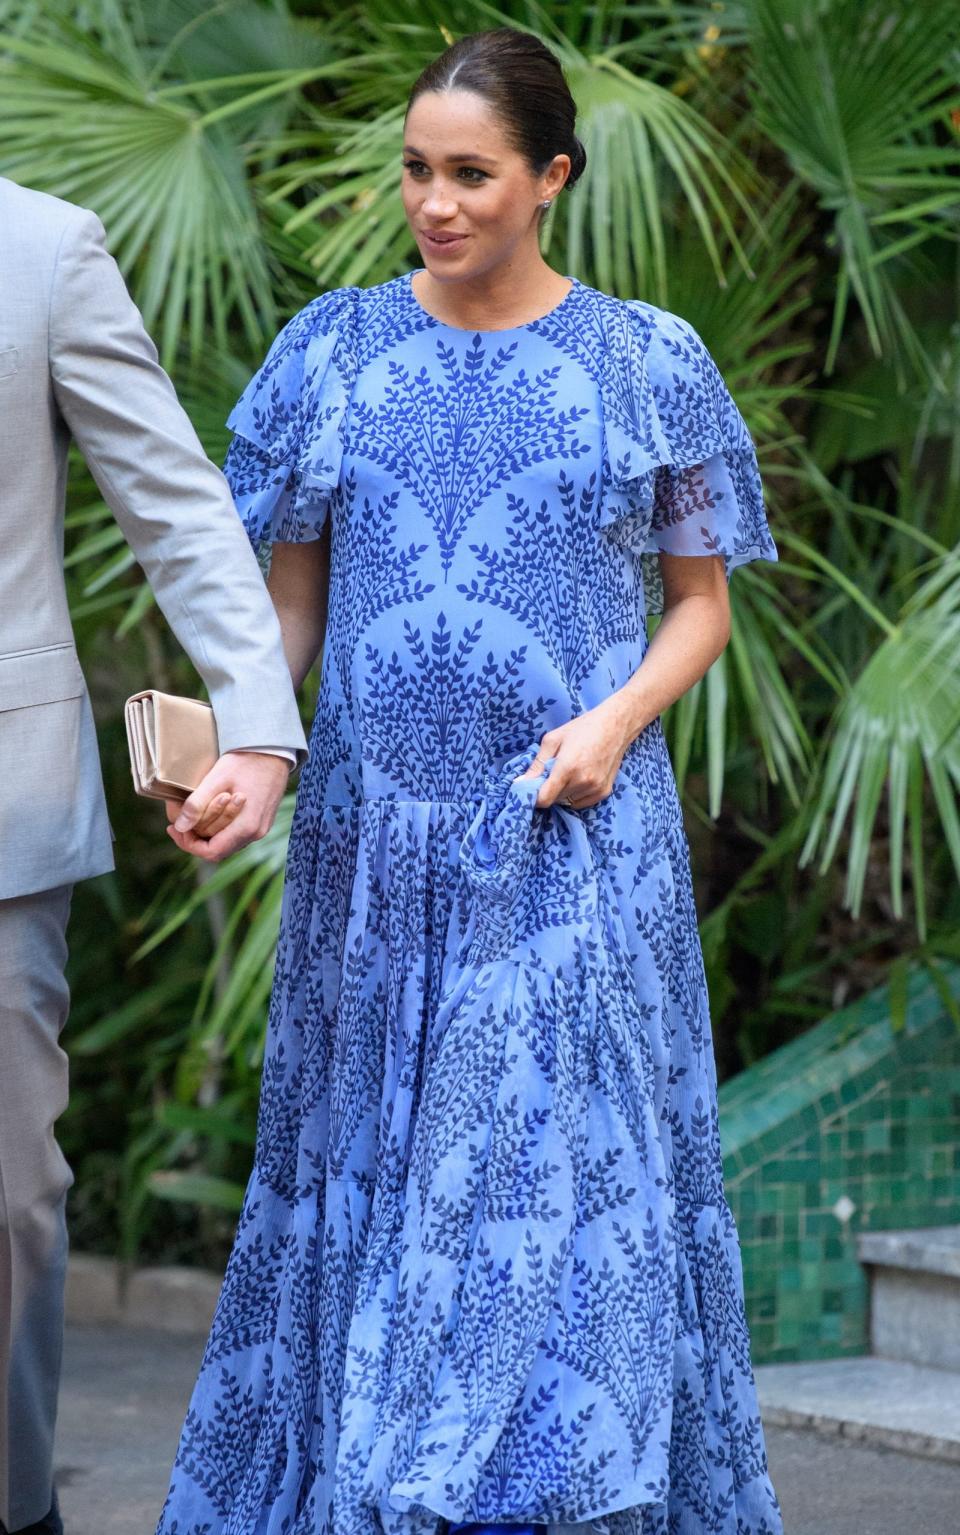 Meghan pregnant - Getty Images